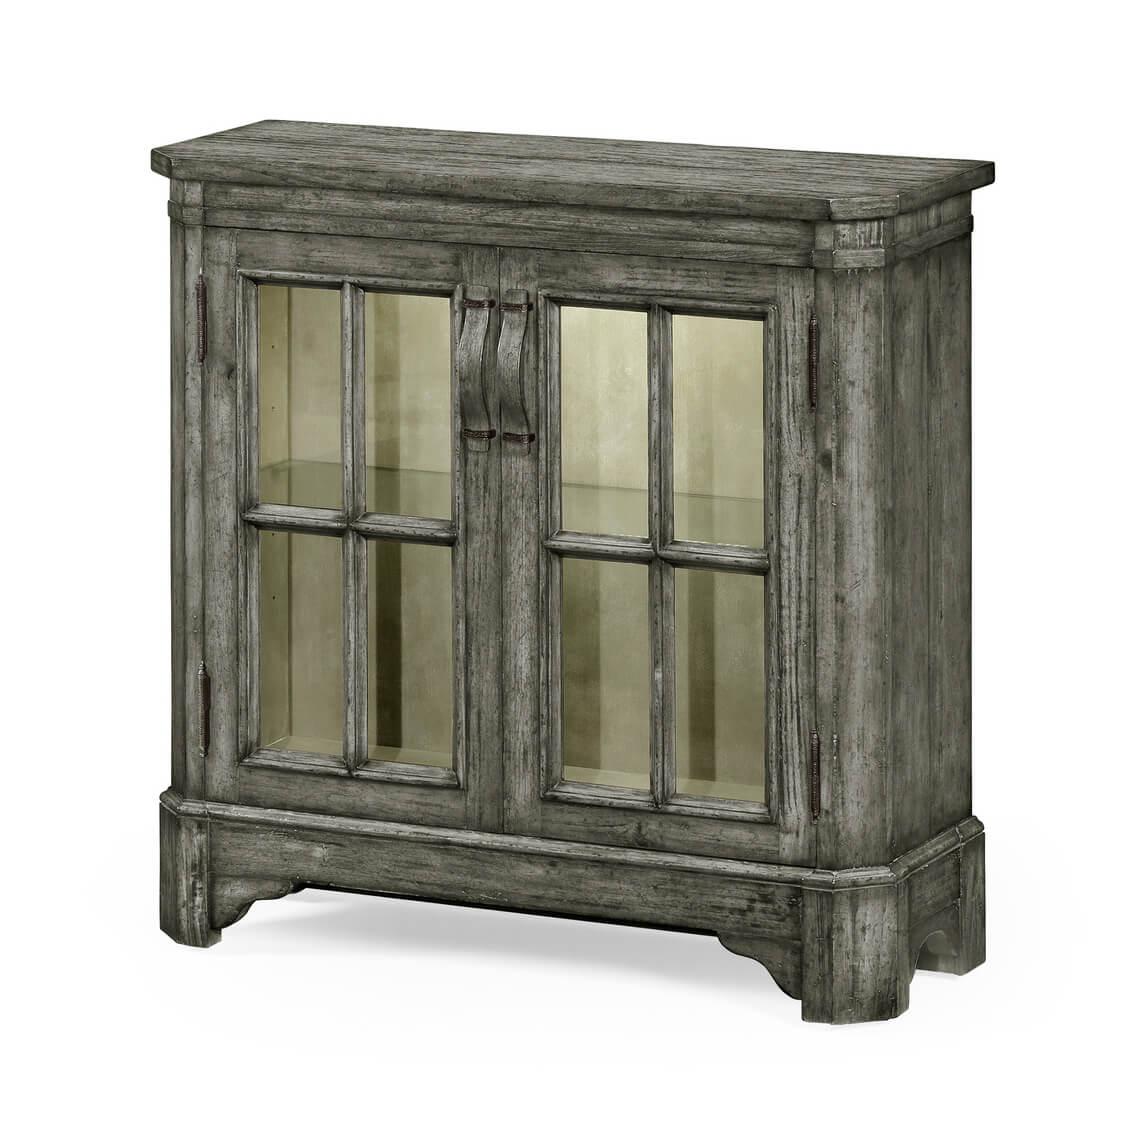 English country style antique dark grey glazed low wall bookcase with internal lighting, two doors, and adjustable glass shelves. Wooden strap handles with patinated brass details.

Dimensions: 35 5/8